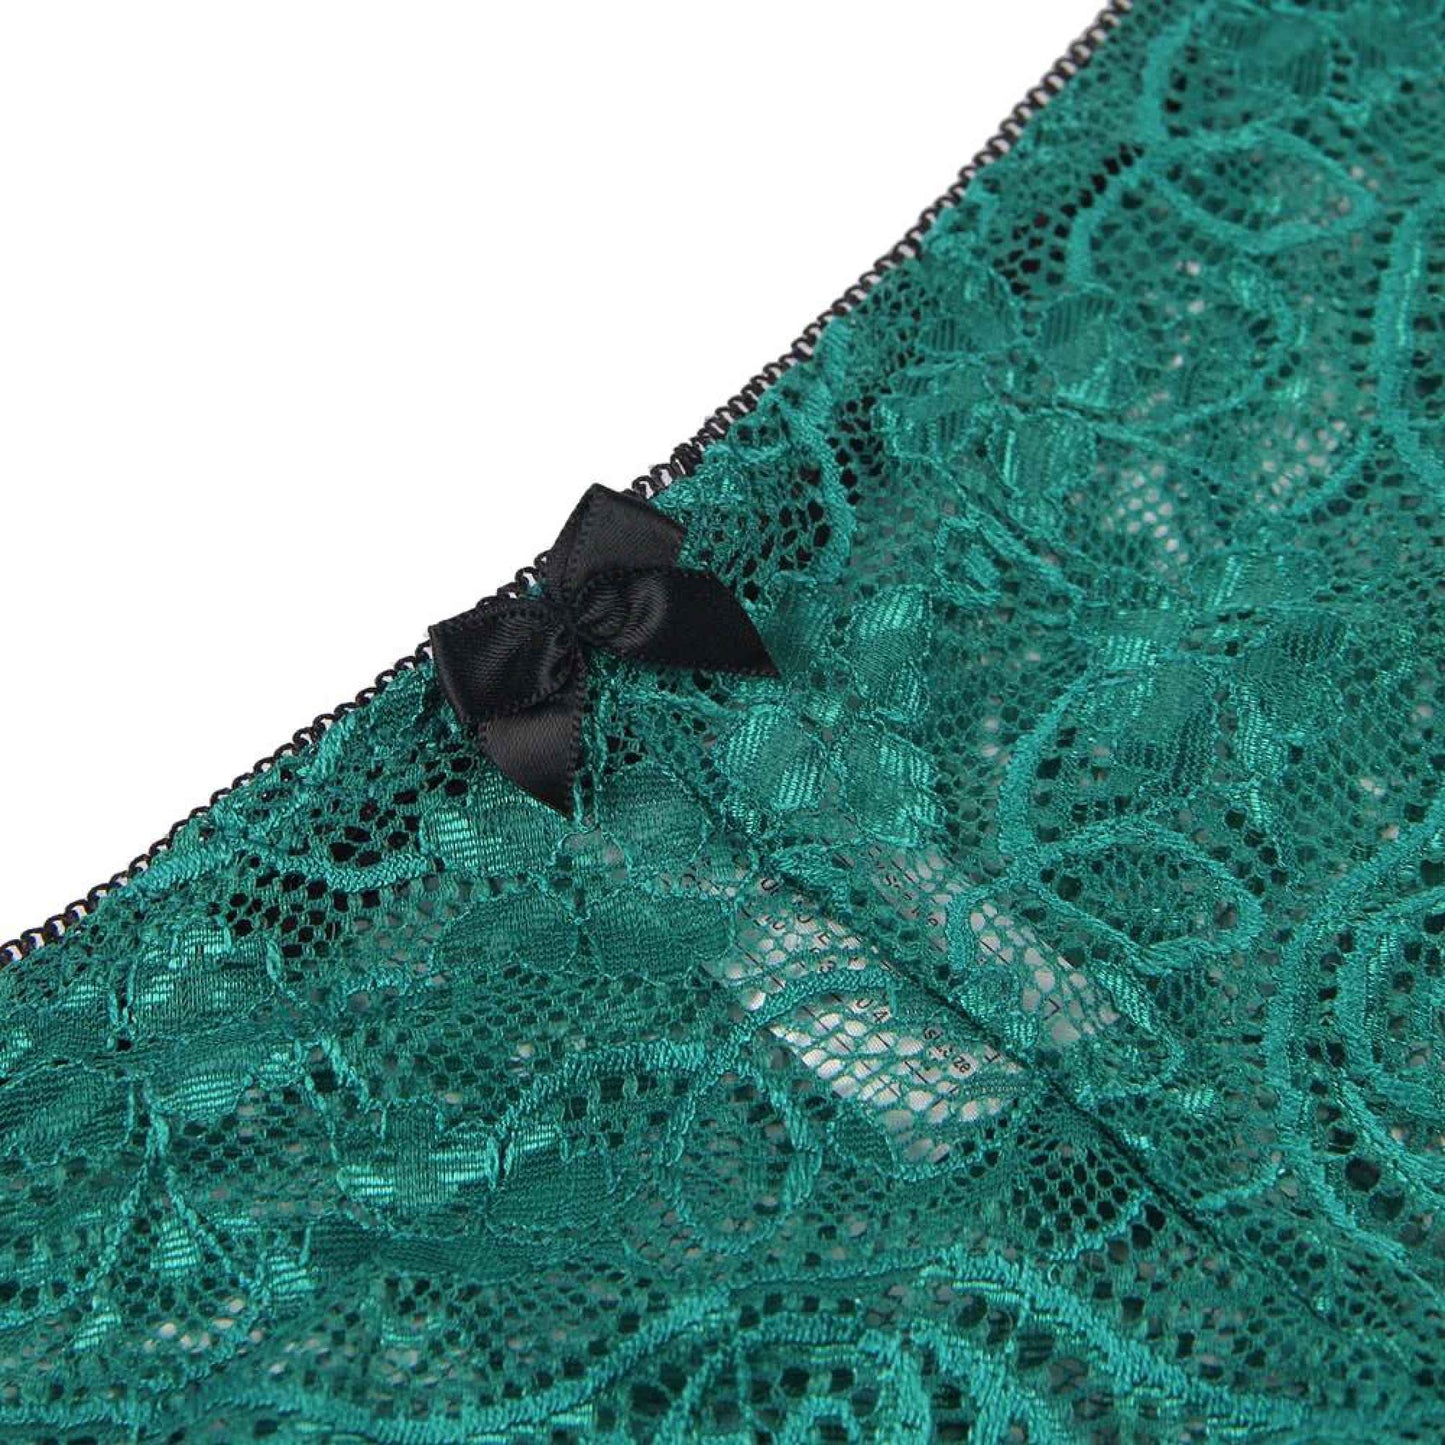 Green 3 Piece Lingerie Lace Set - Bra Panties Boxer Sexy Simulated Silk Underwear